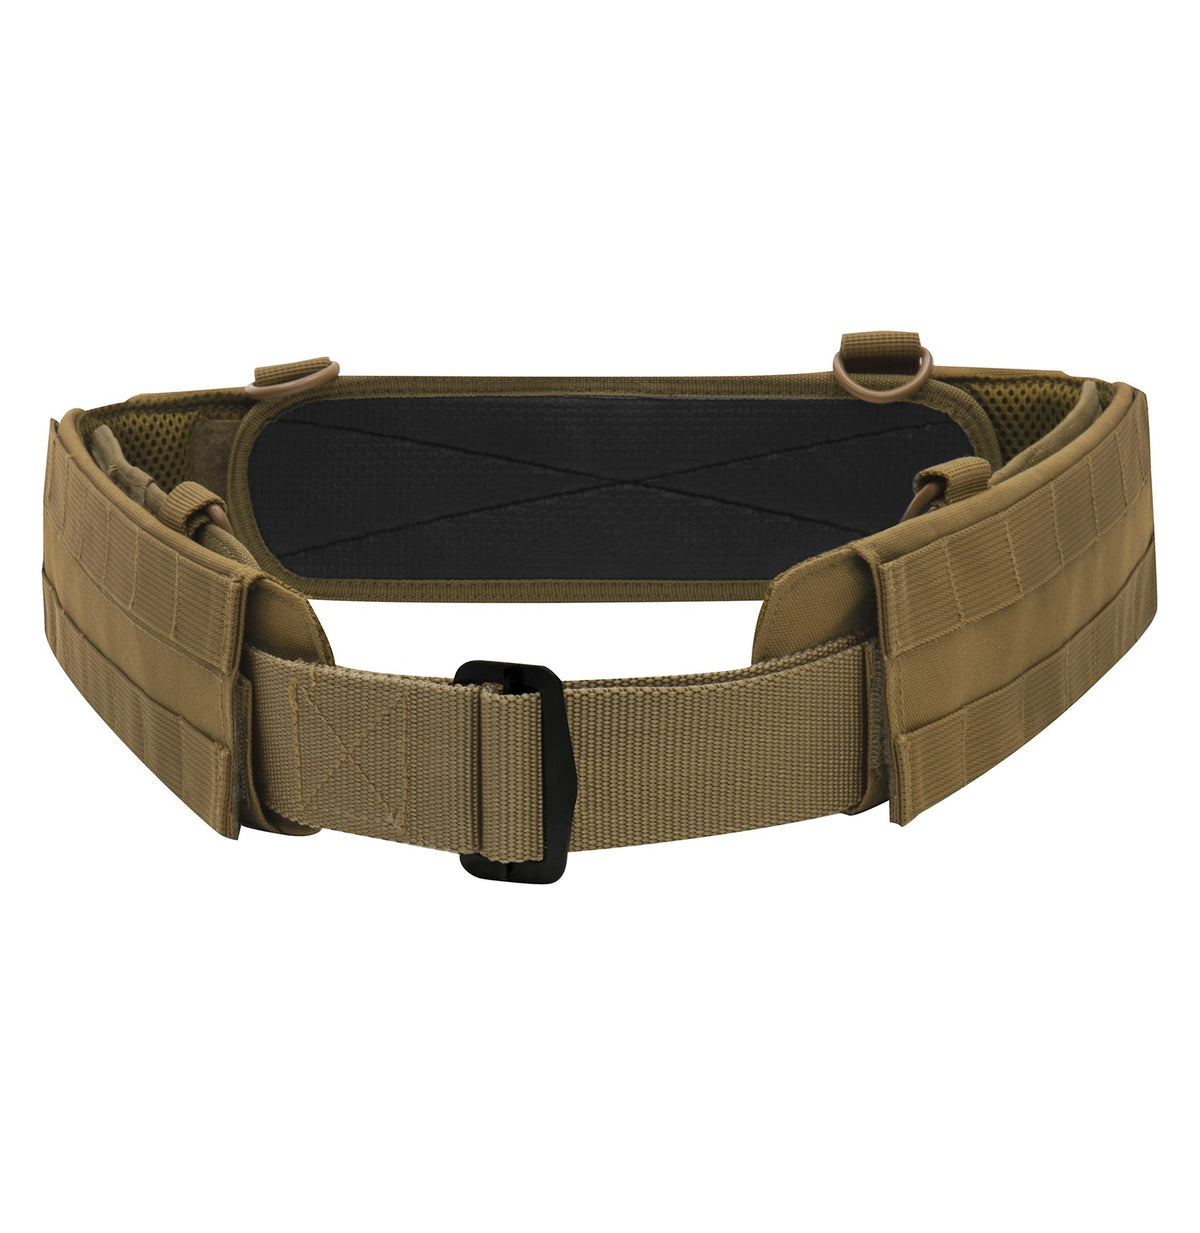 Rothco MOLLE Lightweight Low Profile Tactical Battle Belt Coyote Brown